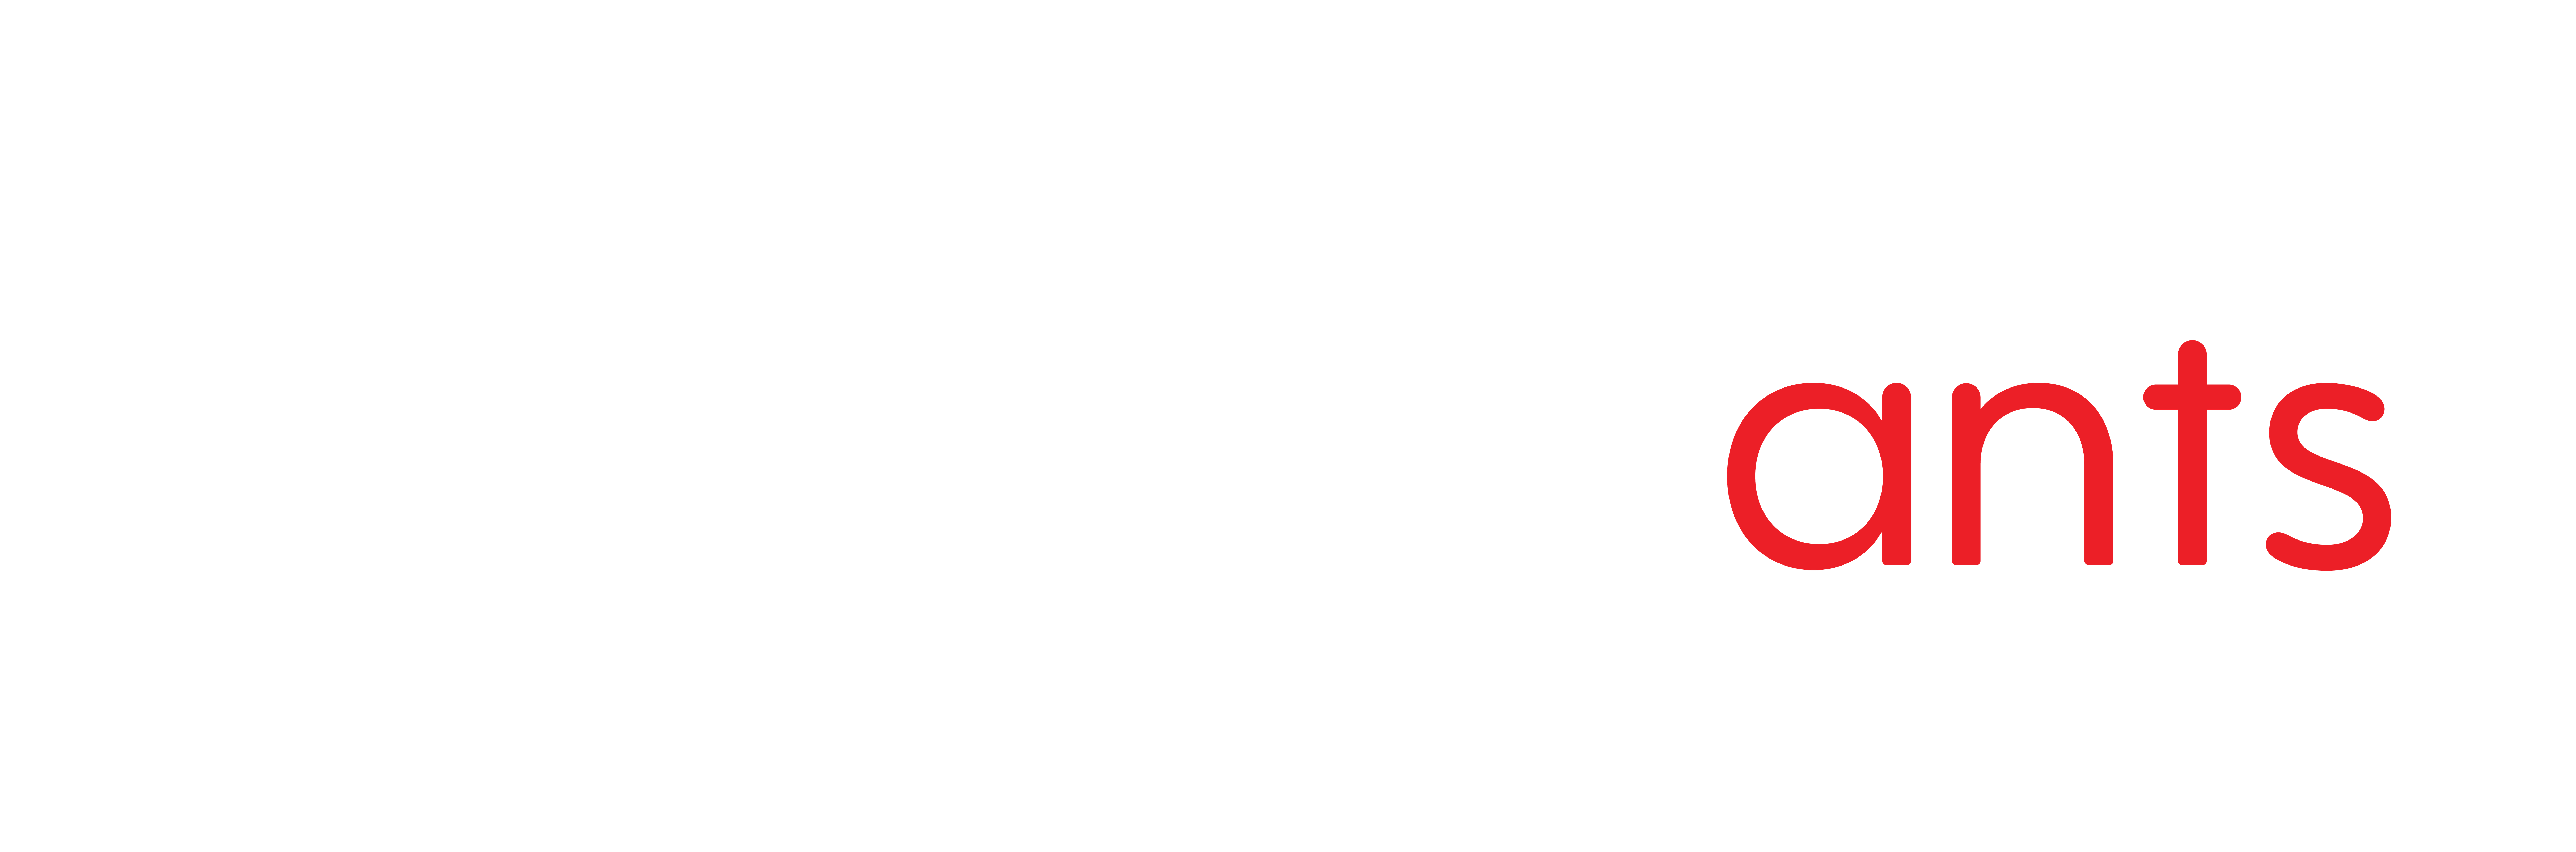 DizzyAnts logo featuring white and red colors.